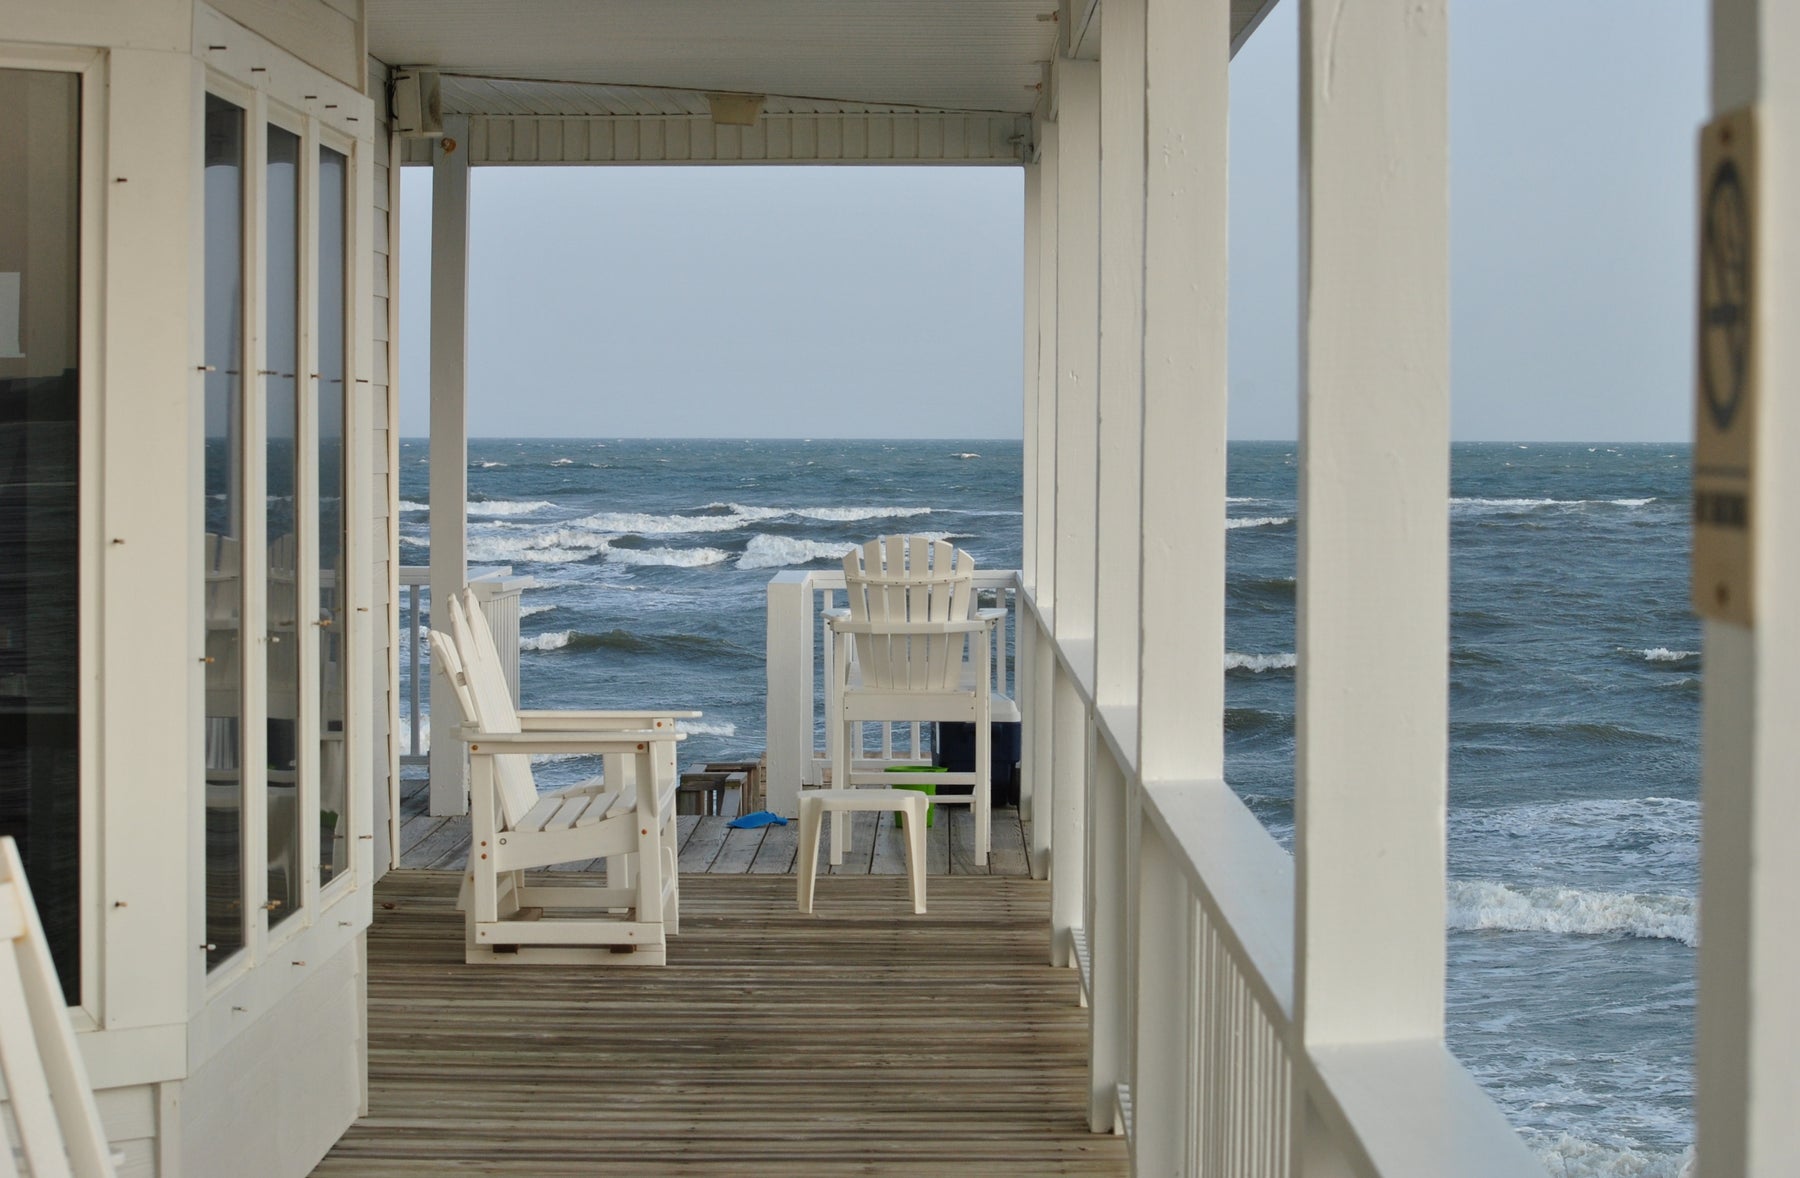 COASTAL LIVING: TIPS FOR BRINGING THE BEACH VIBE INTO YOUR HOME